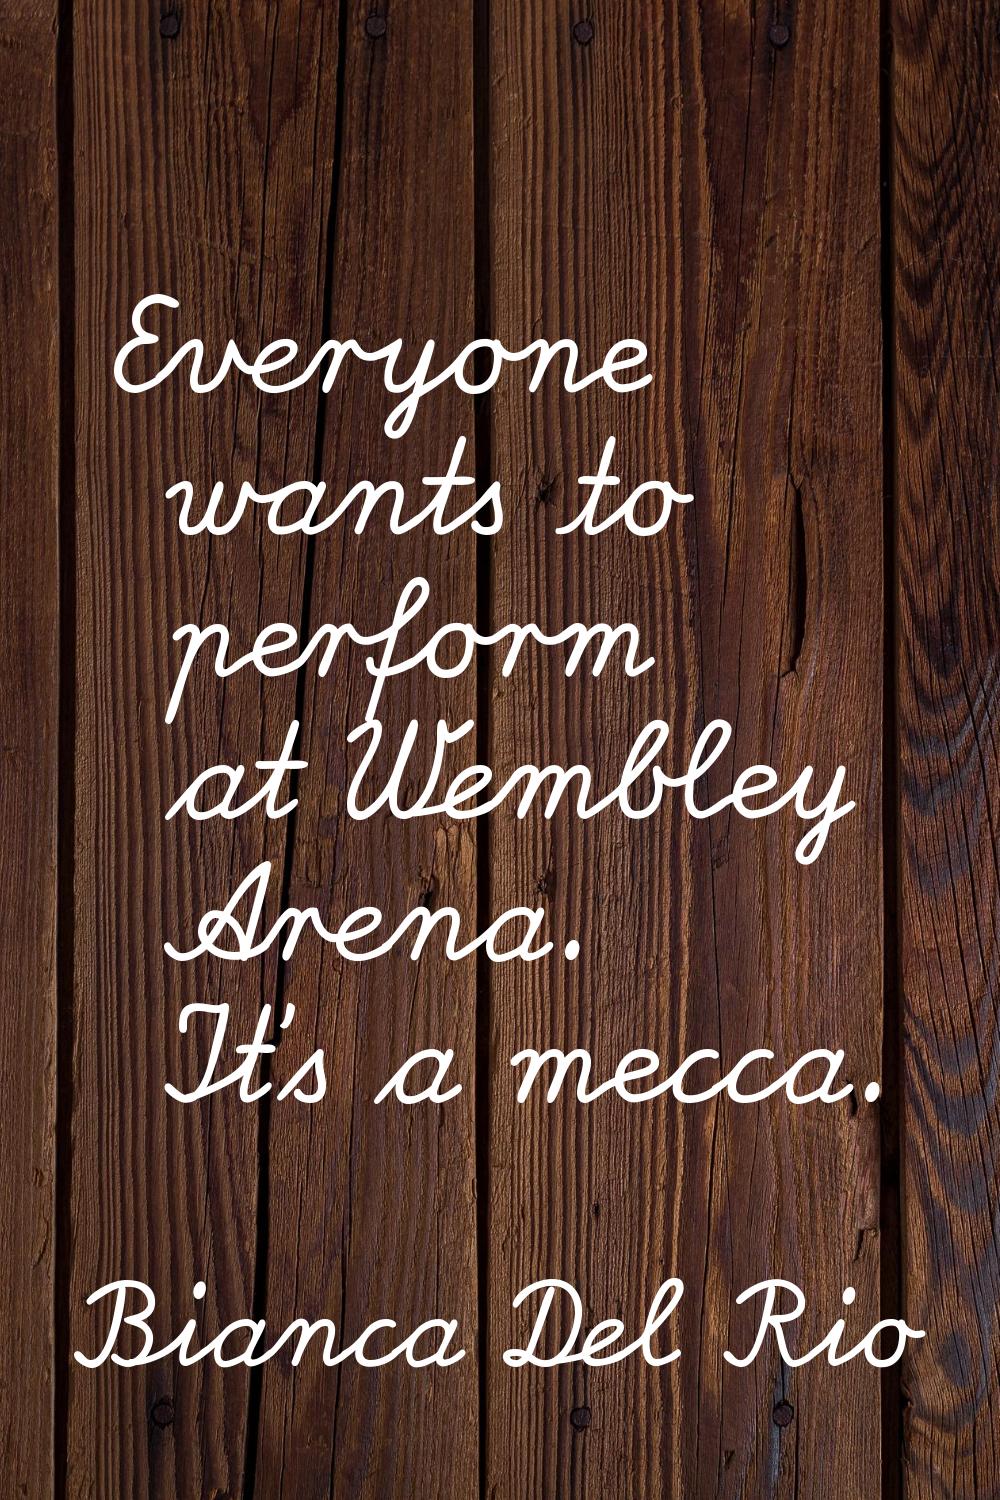 Everyone wants to perform at Wembley Arena. It's a mecca.